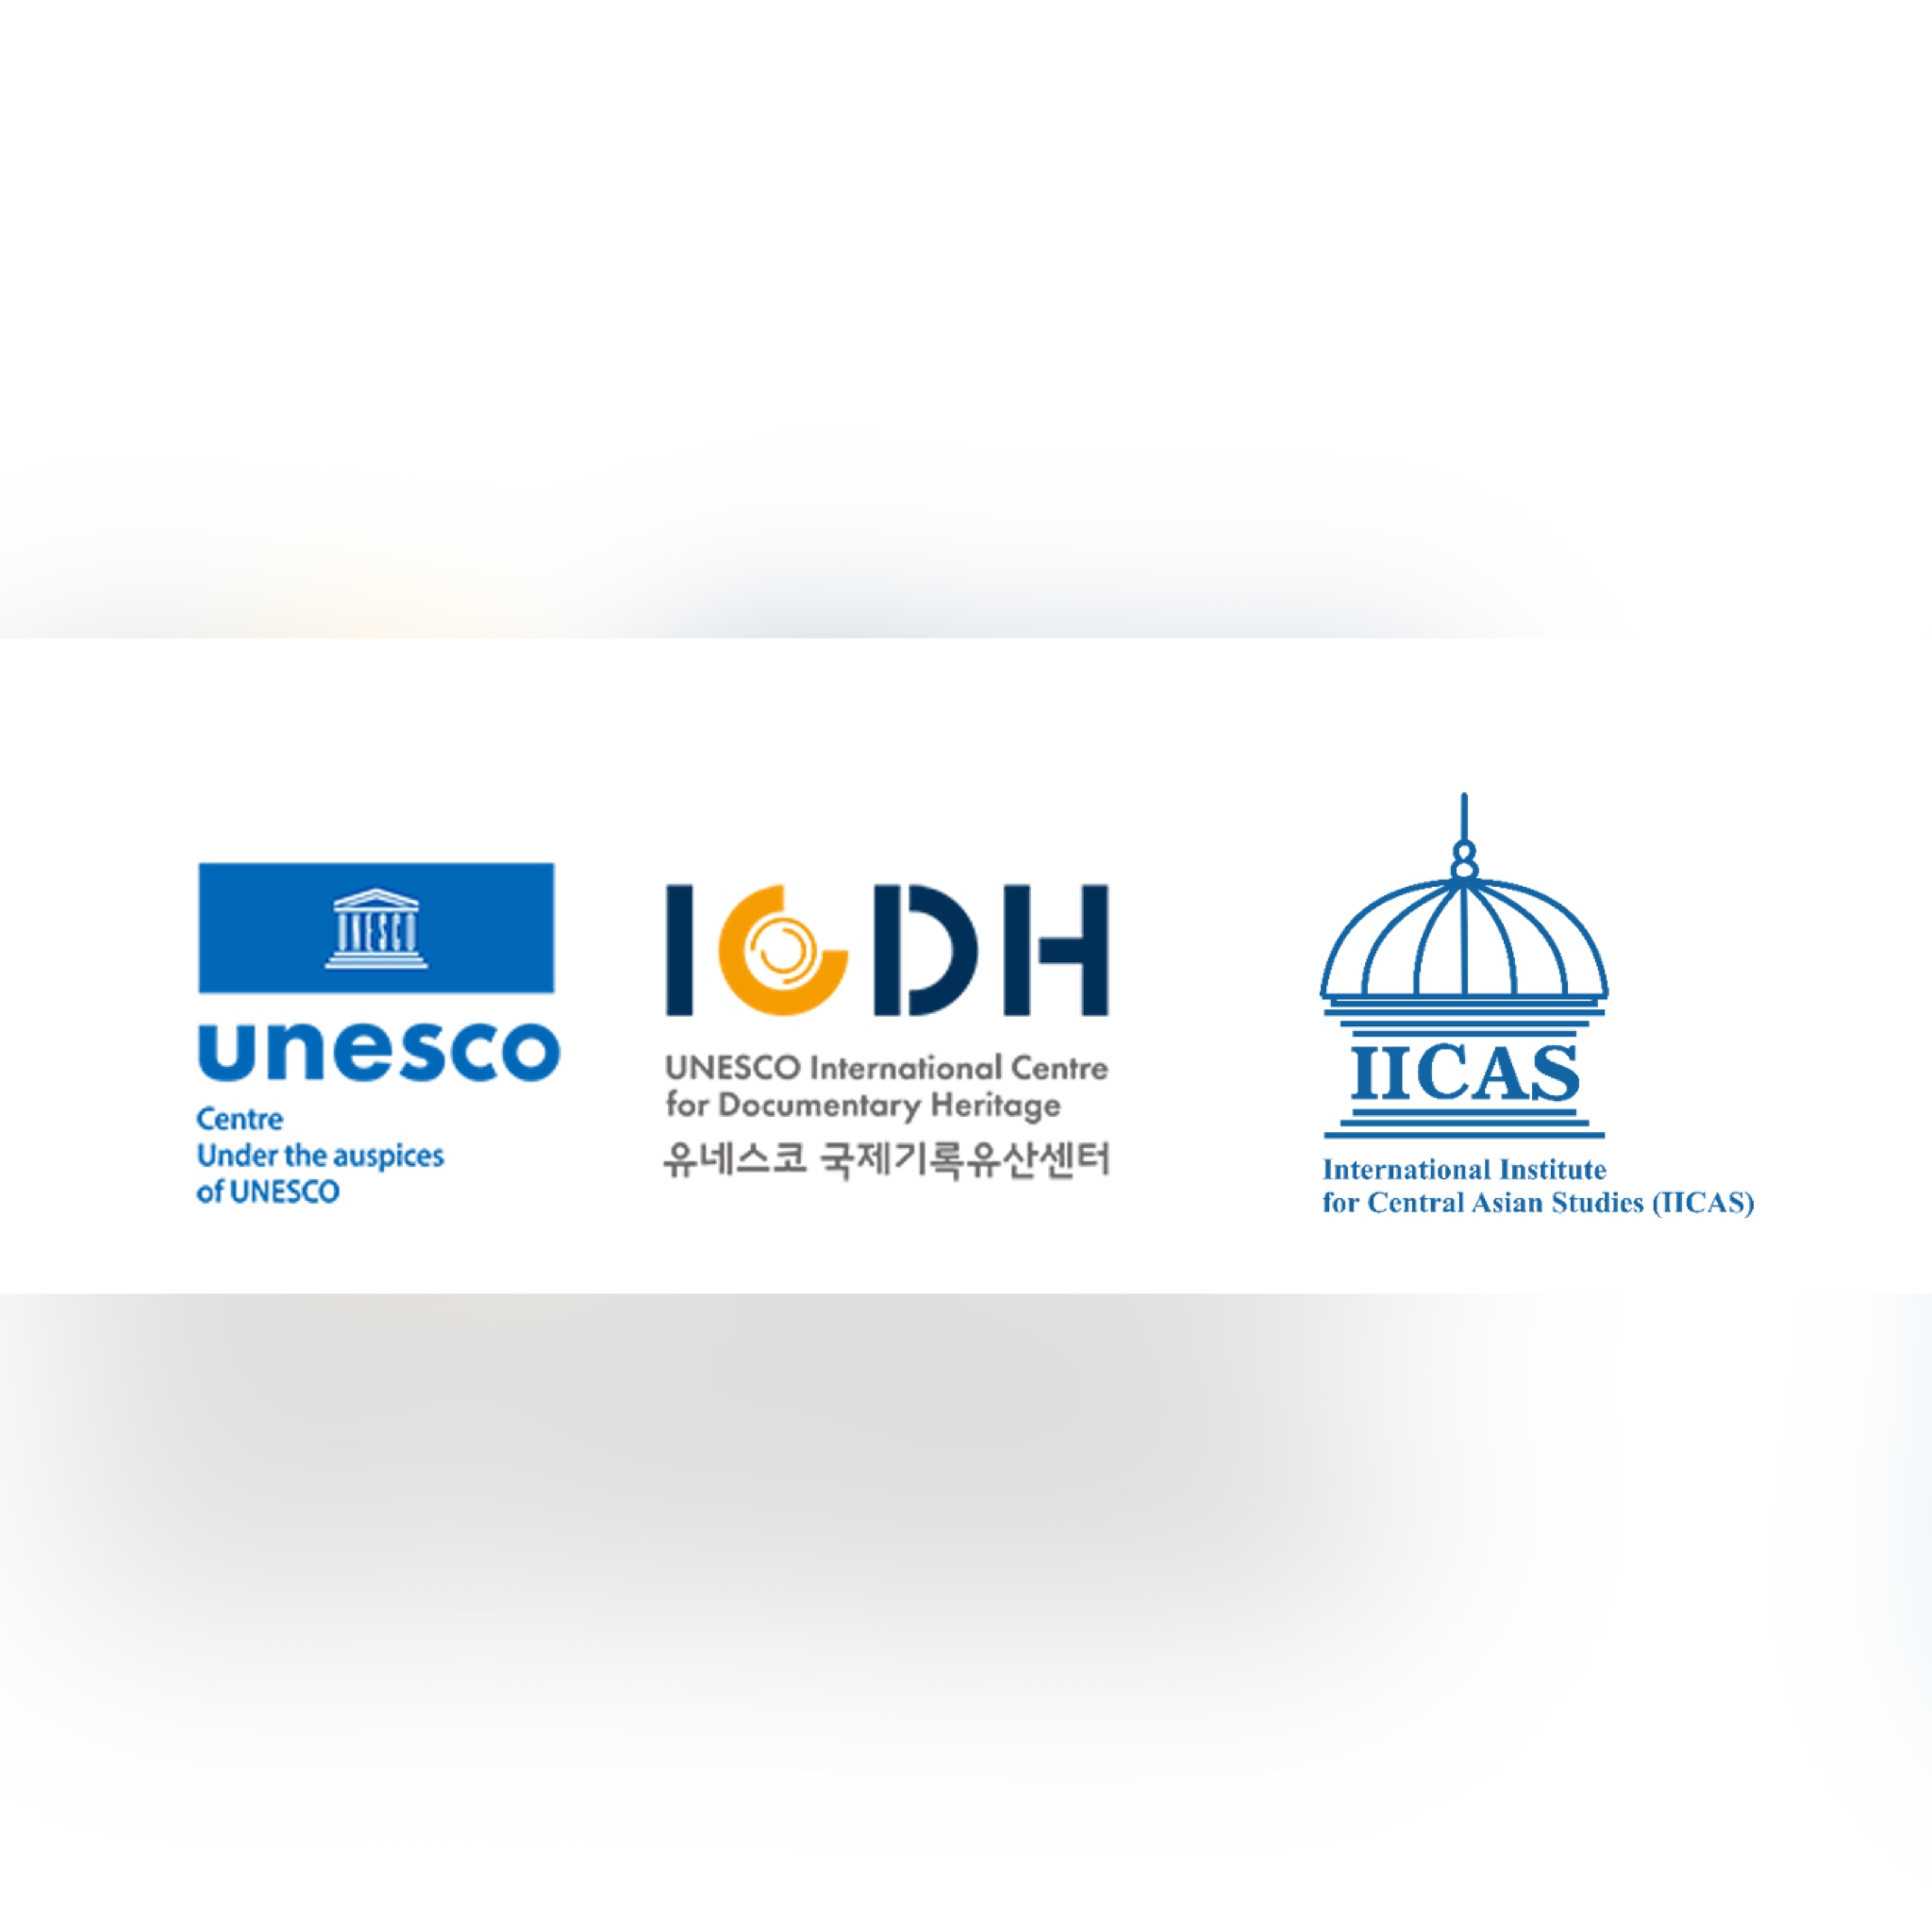 IICAS is pleased to announce the start of a new phase of cooperation with the International Center for Documentary Heritage (ICDH) under the auspices of UNESCO